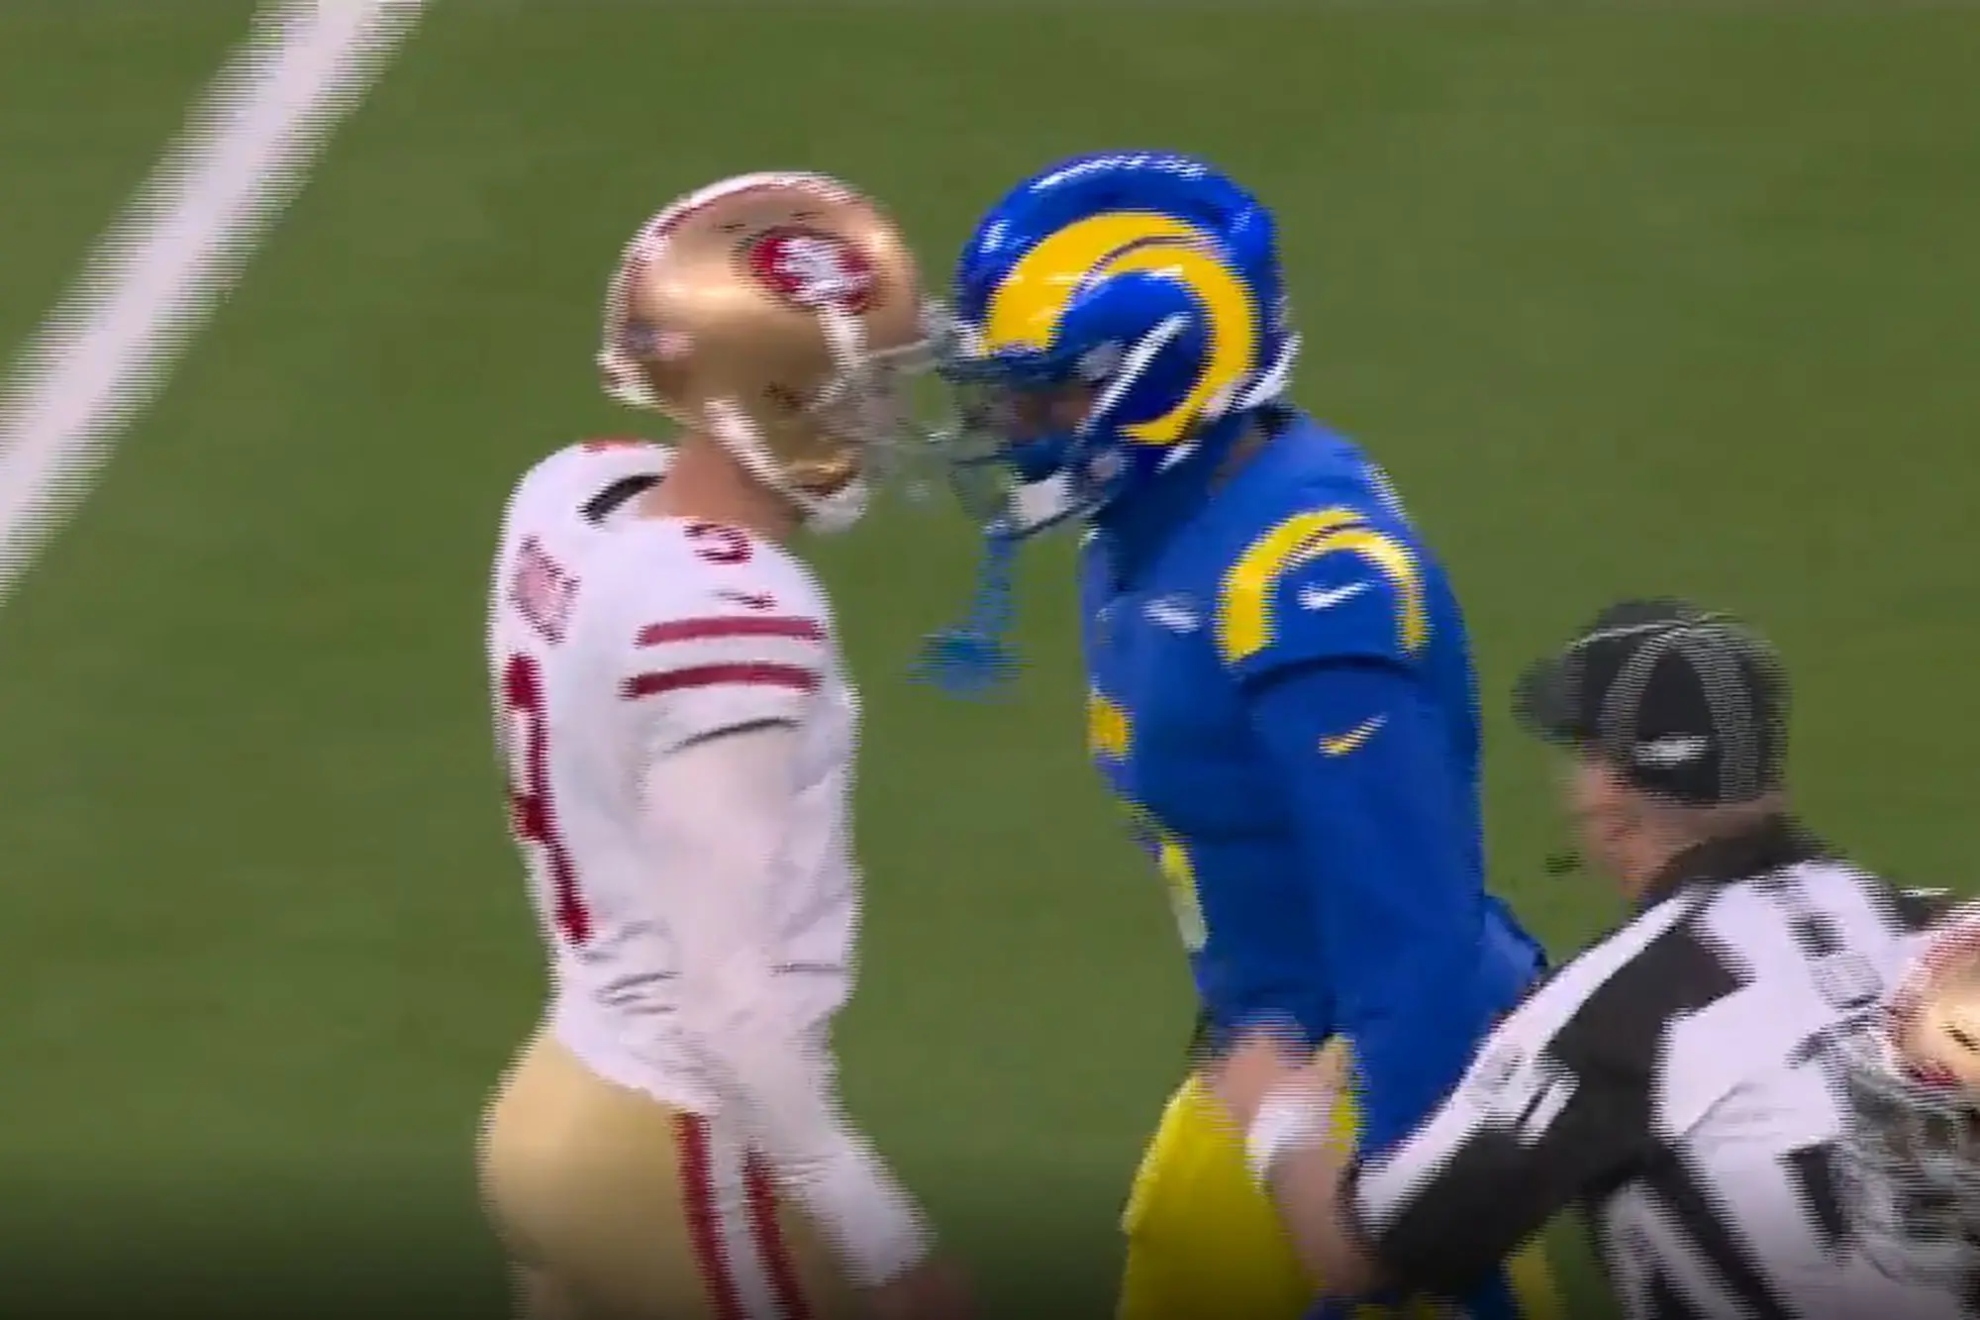 Jalen Ramsey and Robbie Gould almost got into a fight